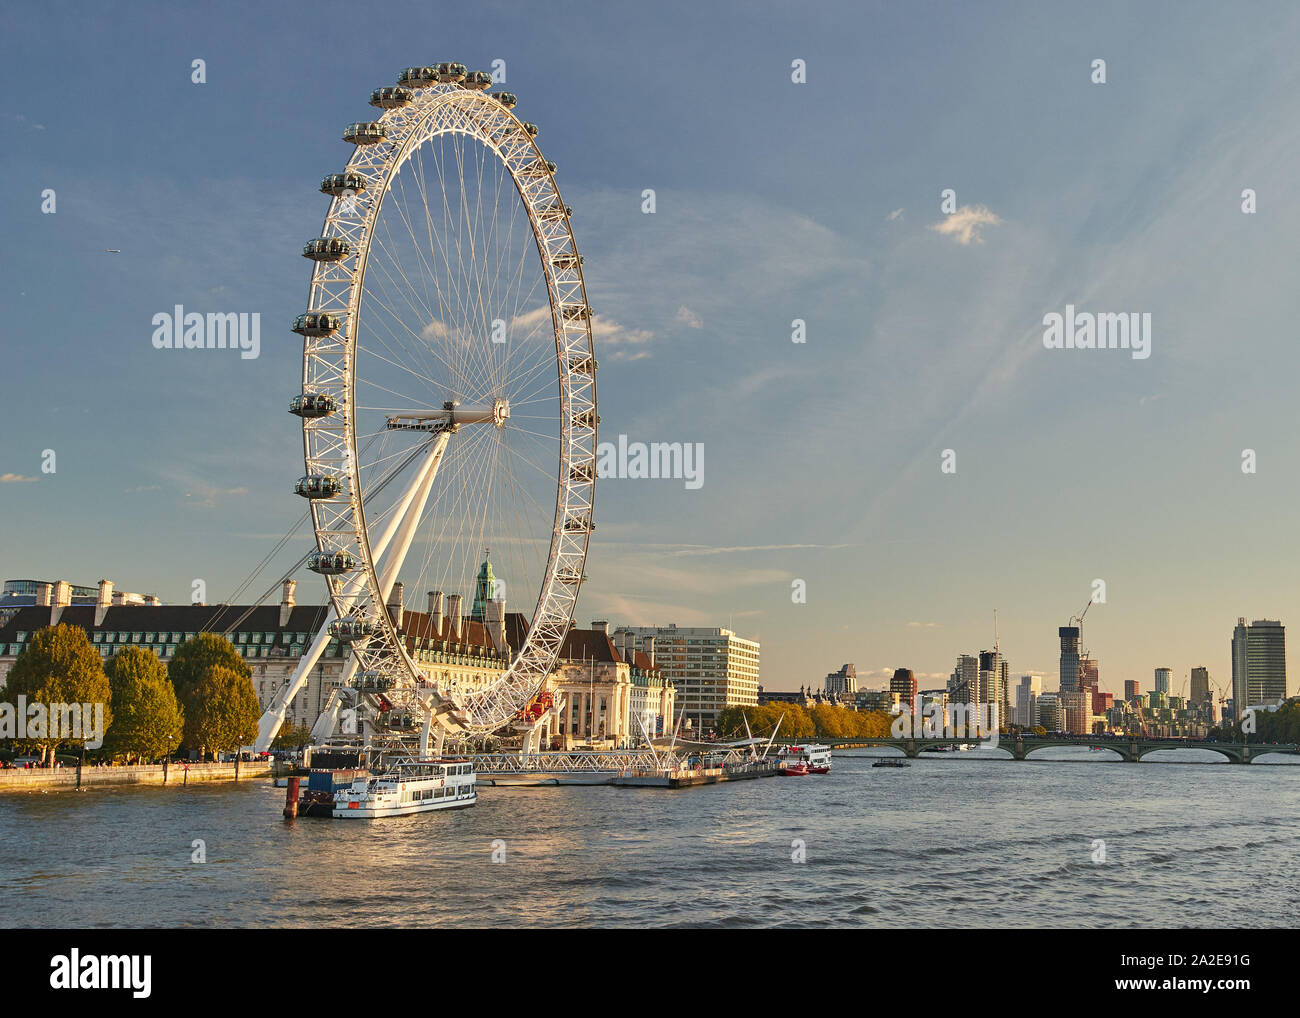 The view of the London Eye, River Thames and Big Ben from the Golden  Jubilee Bridge stock photo - OFFSET